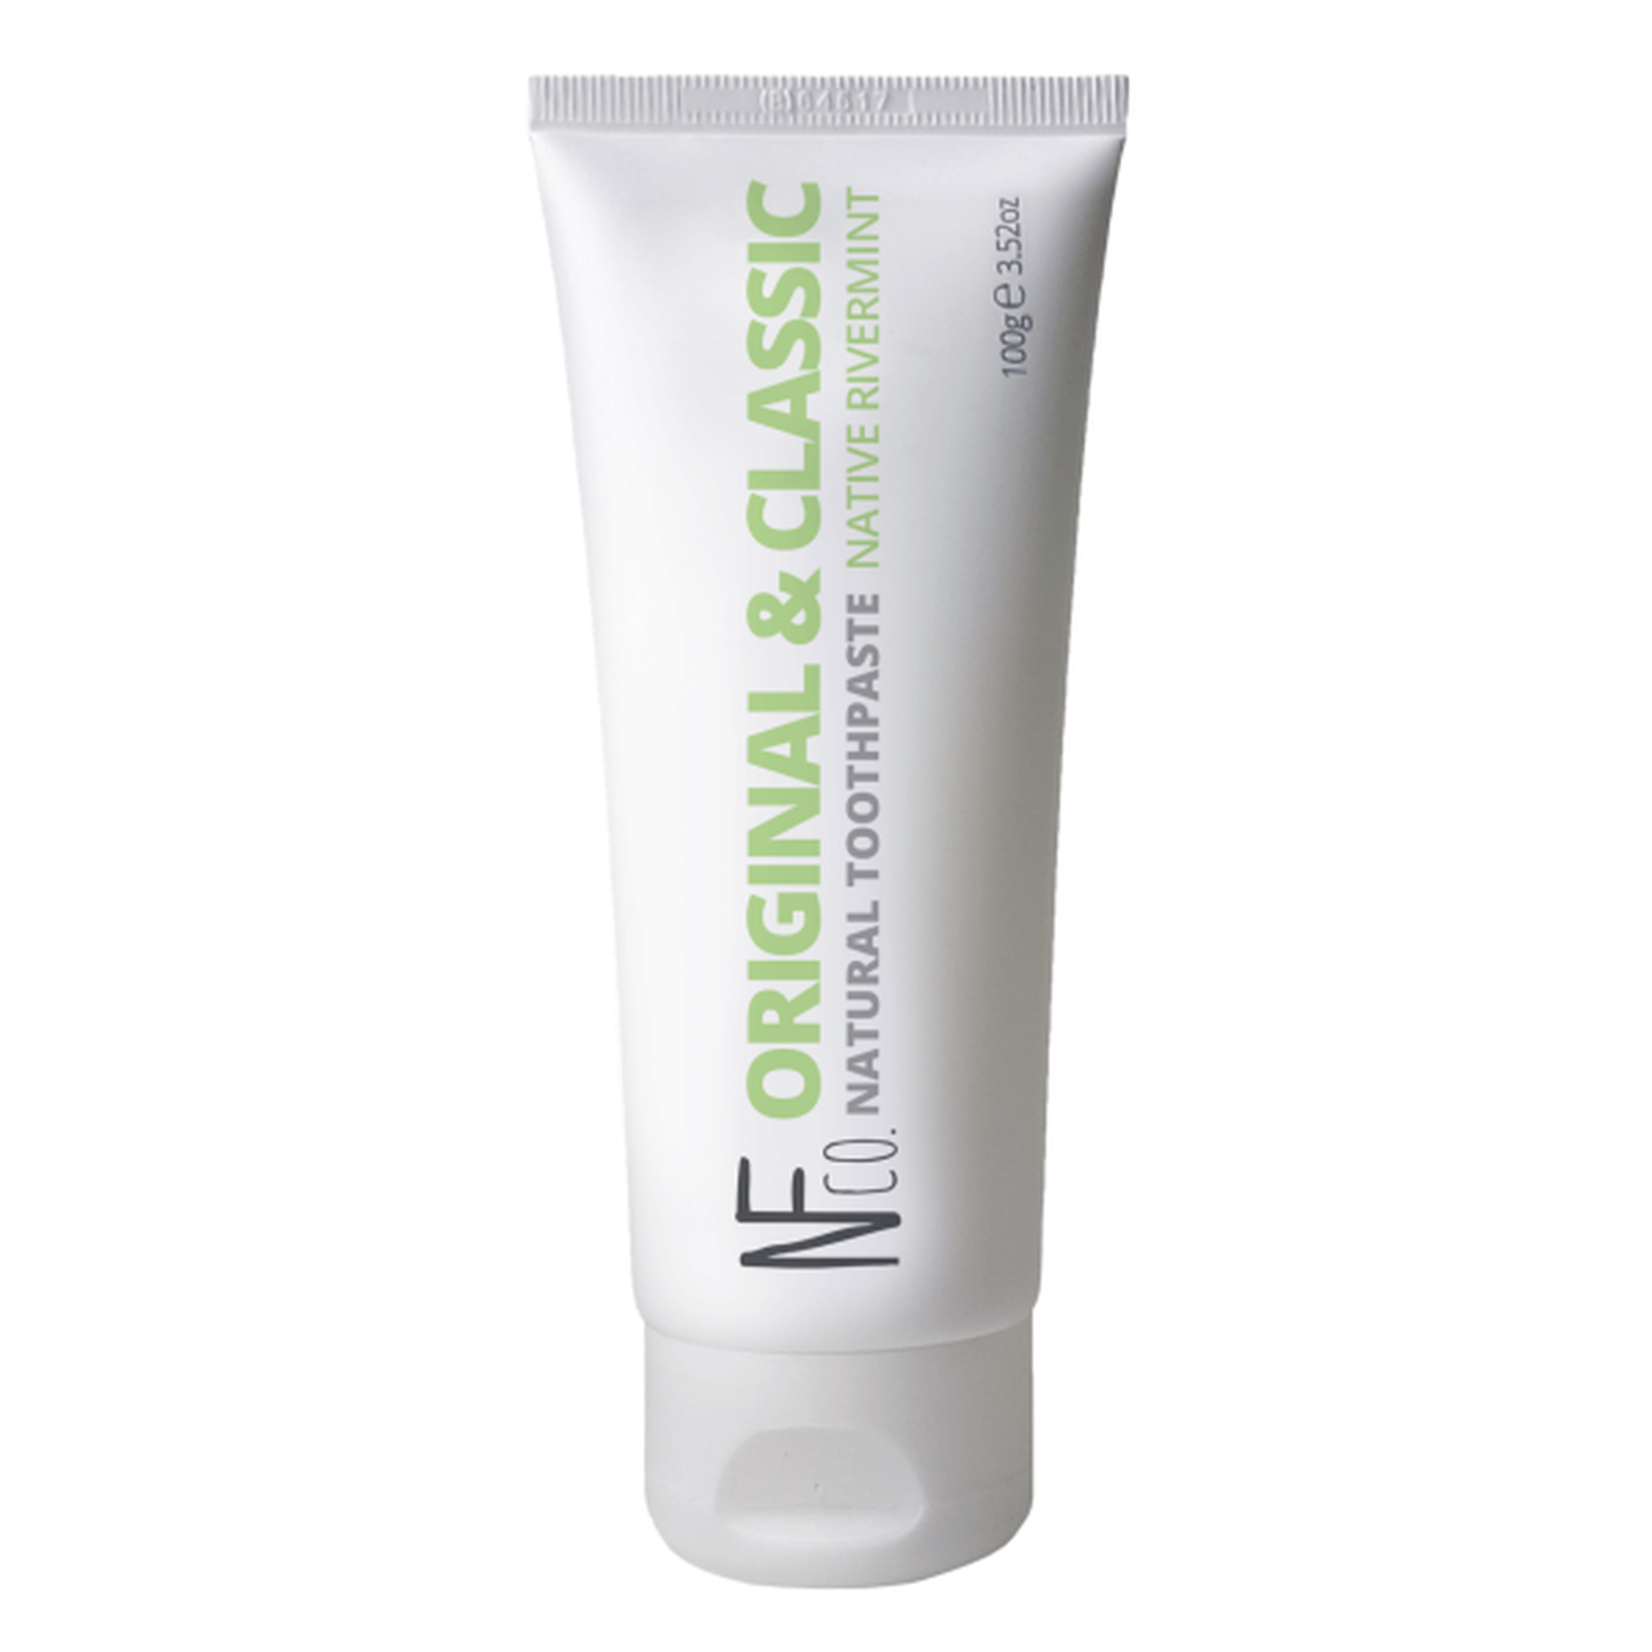 The NF Co. The Natural Family Co. Toothpaste Original & Classic